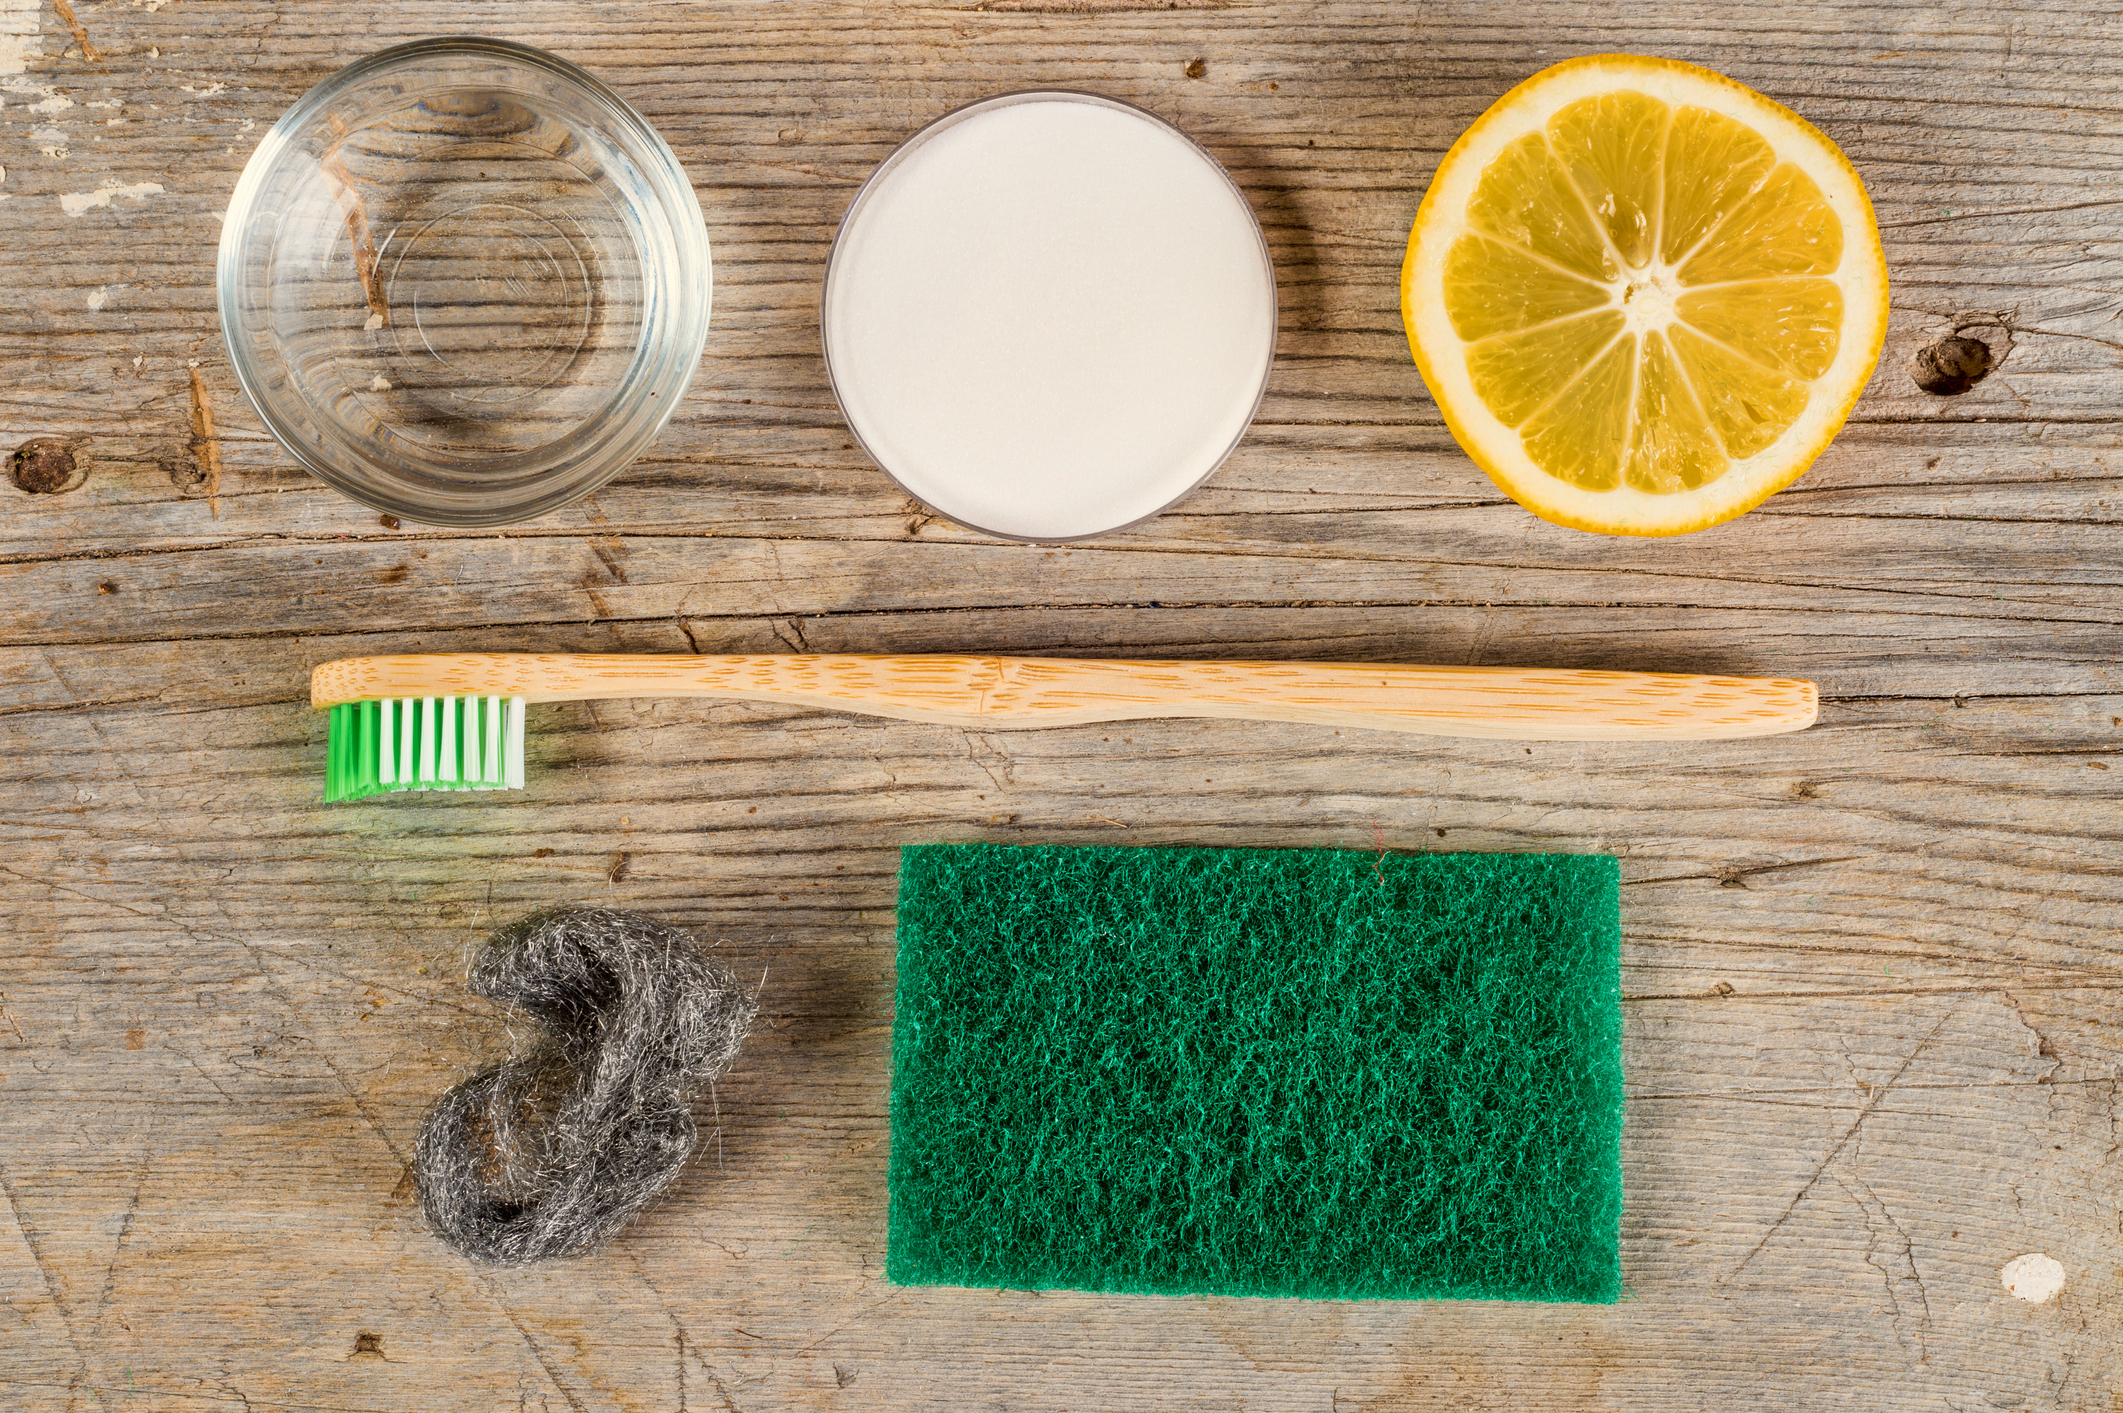 An overhead shot of a wooden toothbrush, sponge, lemon, soap, baking soda, steel wool, and a jar of water on wooden surface.